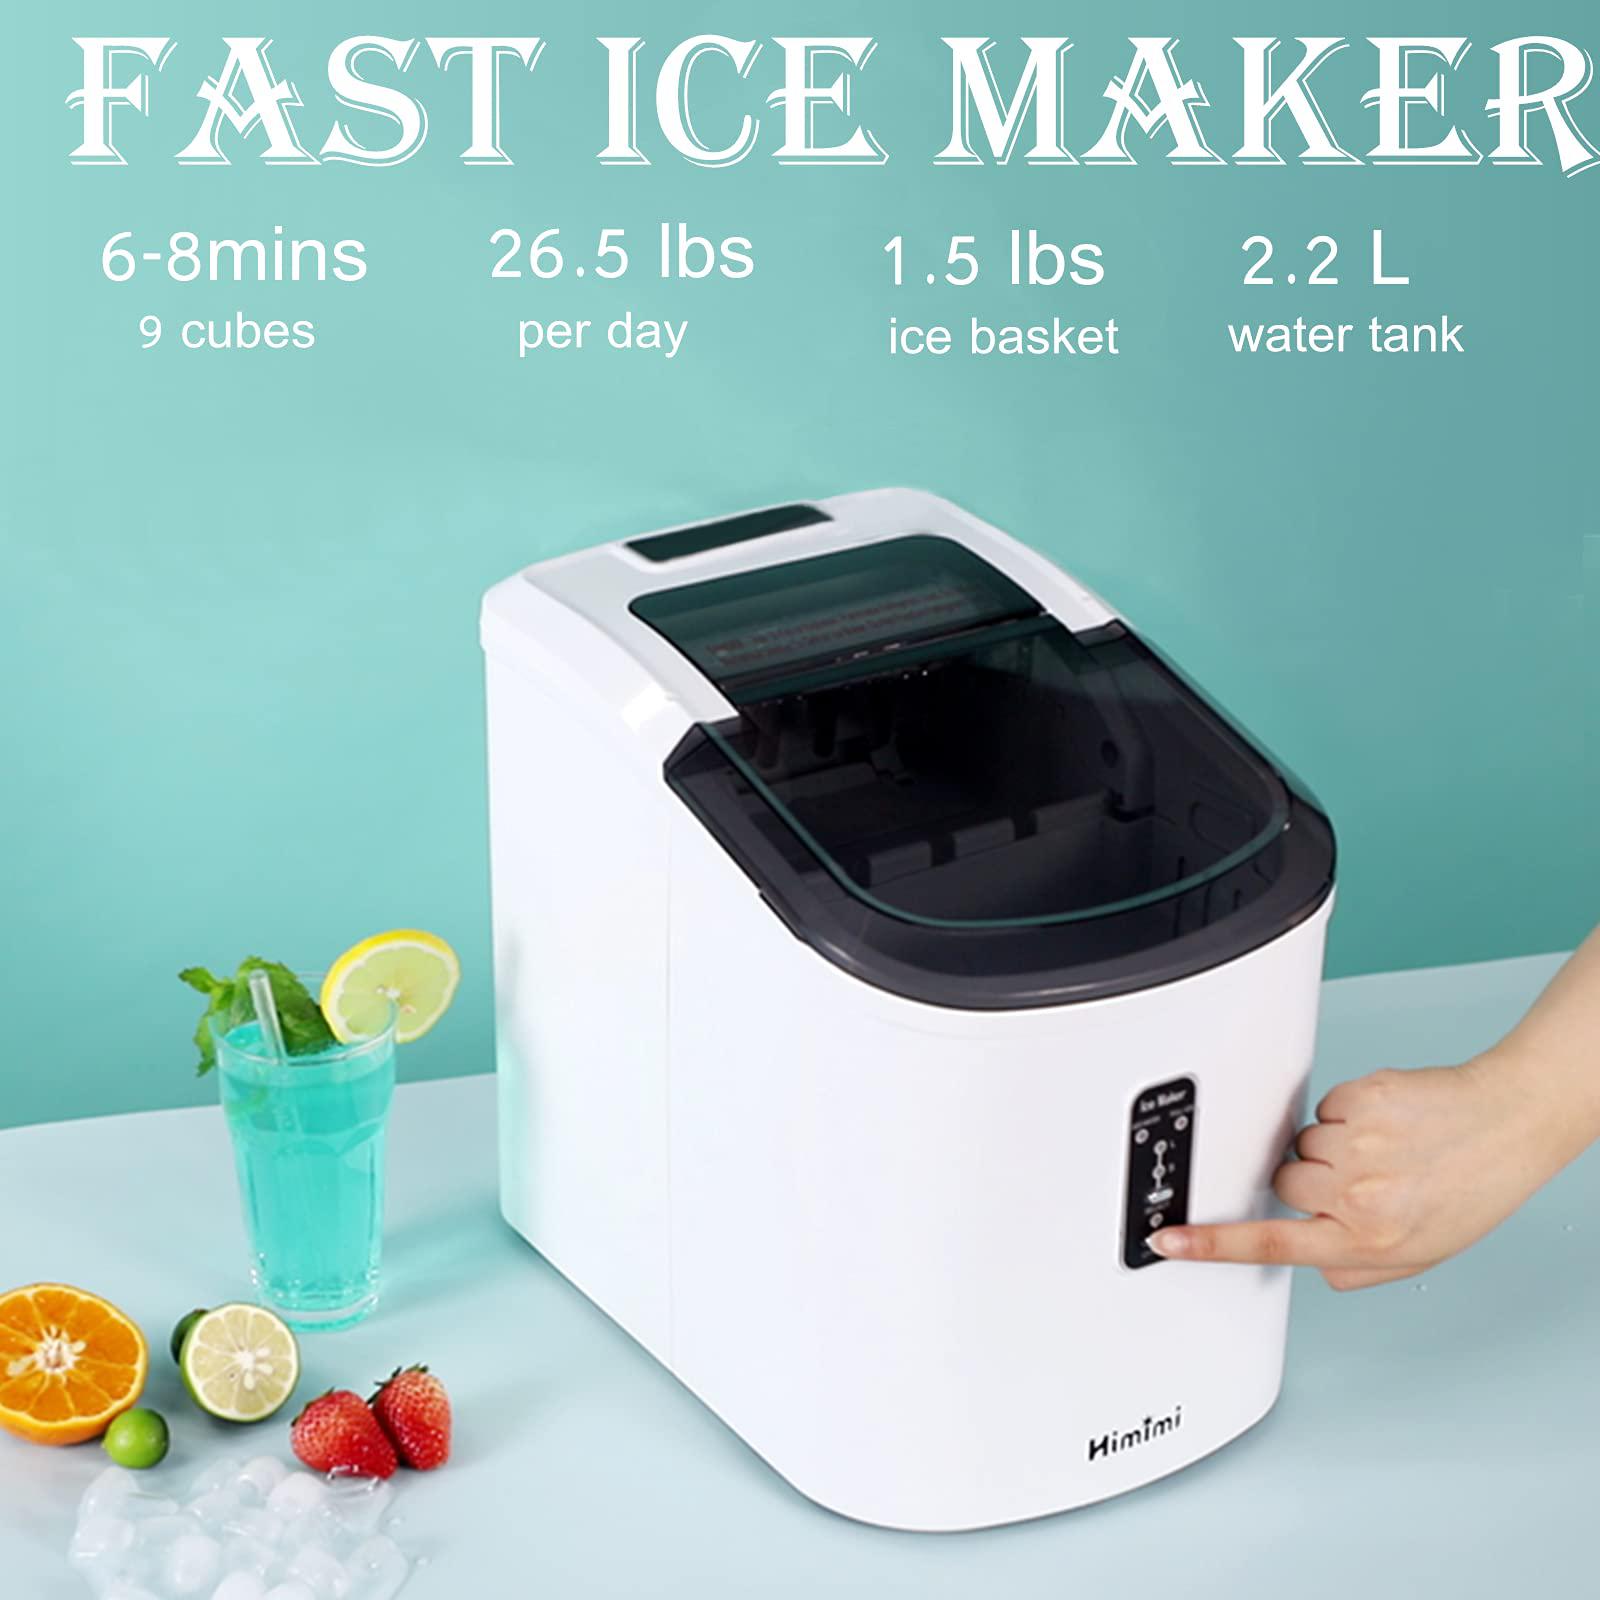 himimi ice maker machine for countertop, summer chill on ice, 9 ice cubes in 6-8 minutes, 26 pounds in 24 hours, portable ele